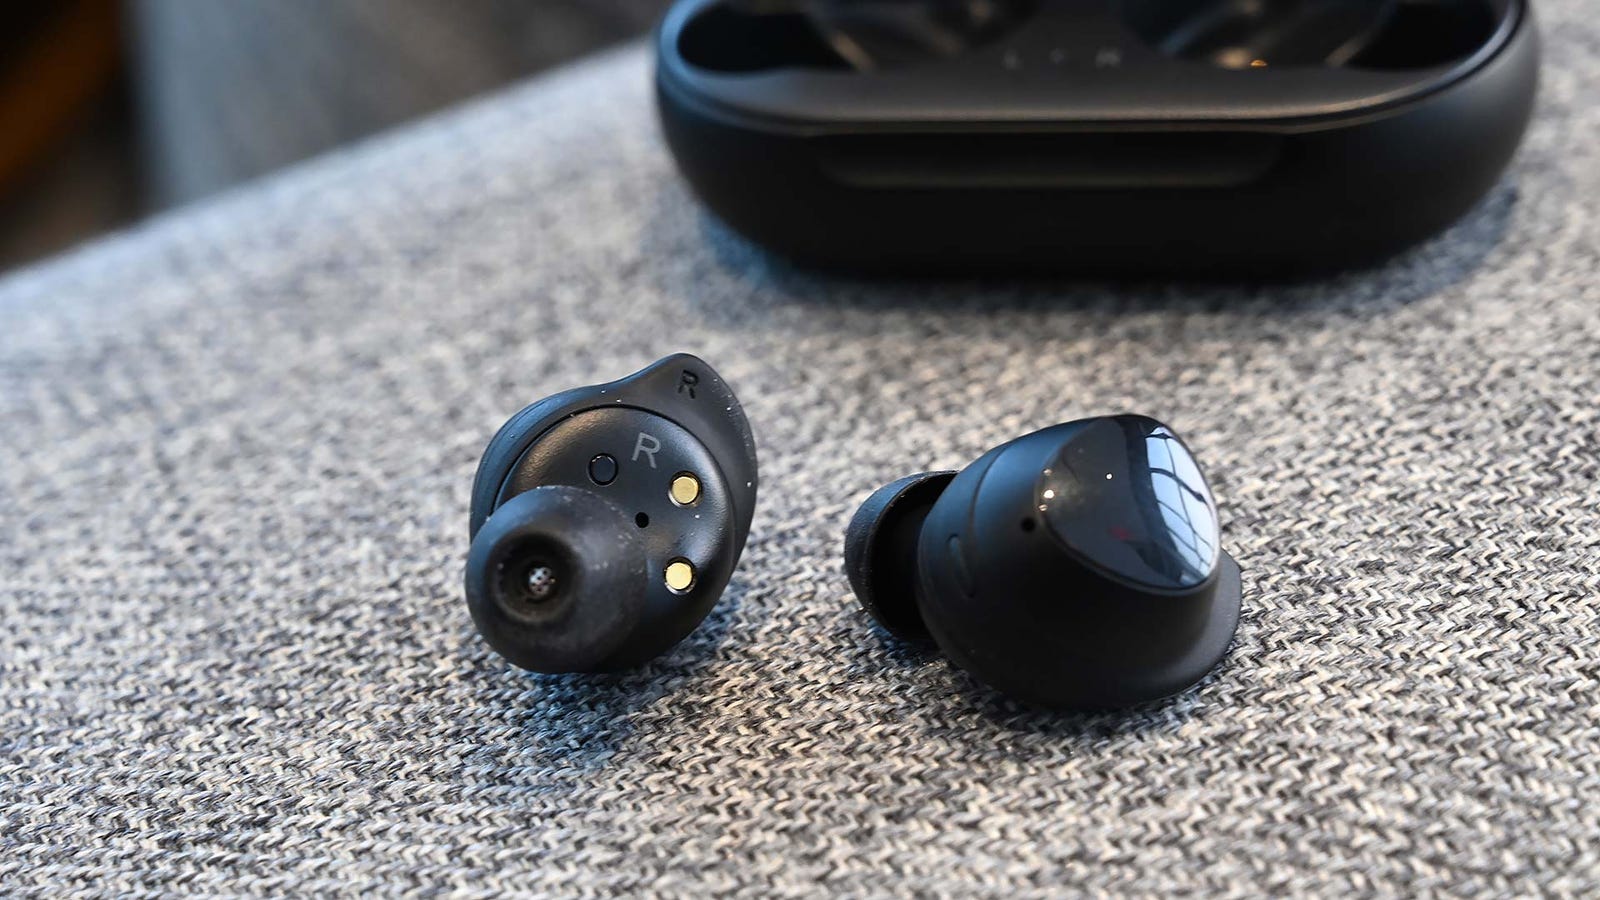 The Galaxy Buds Are Samsung's Attempt to One Up the AirPods | Gizmodo UK